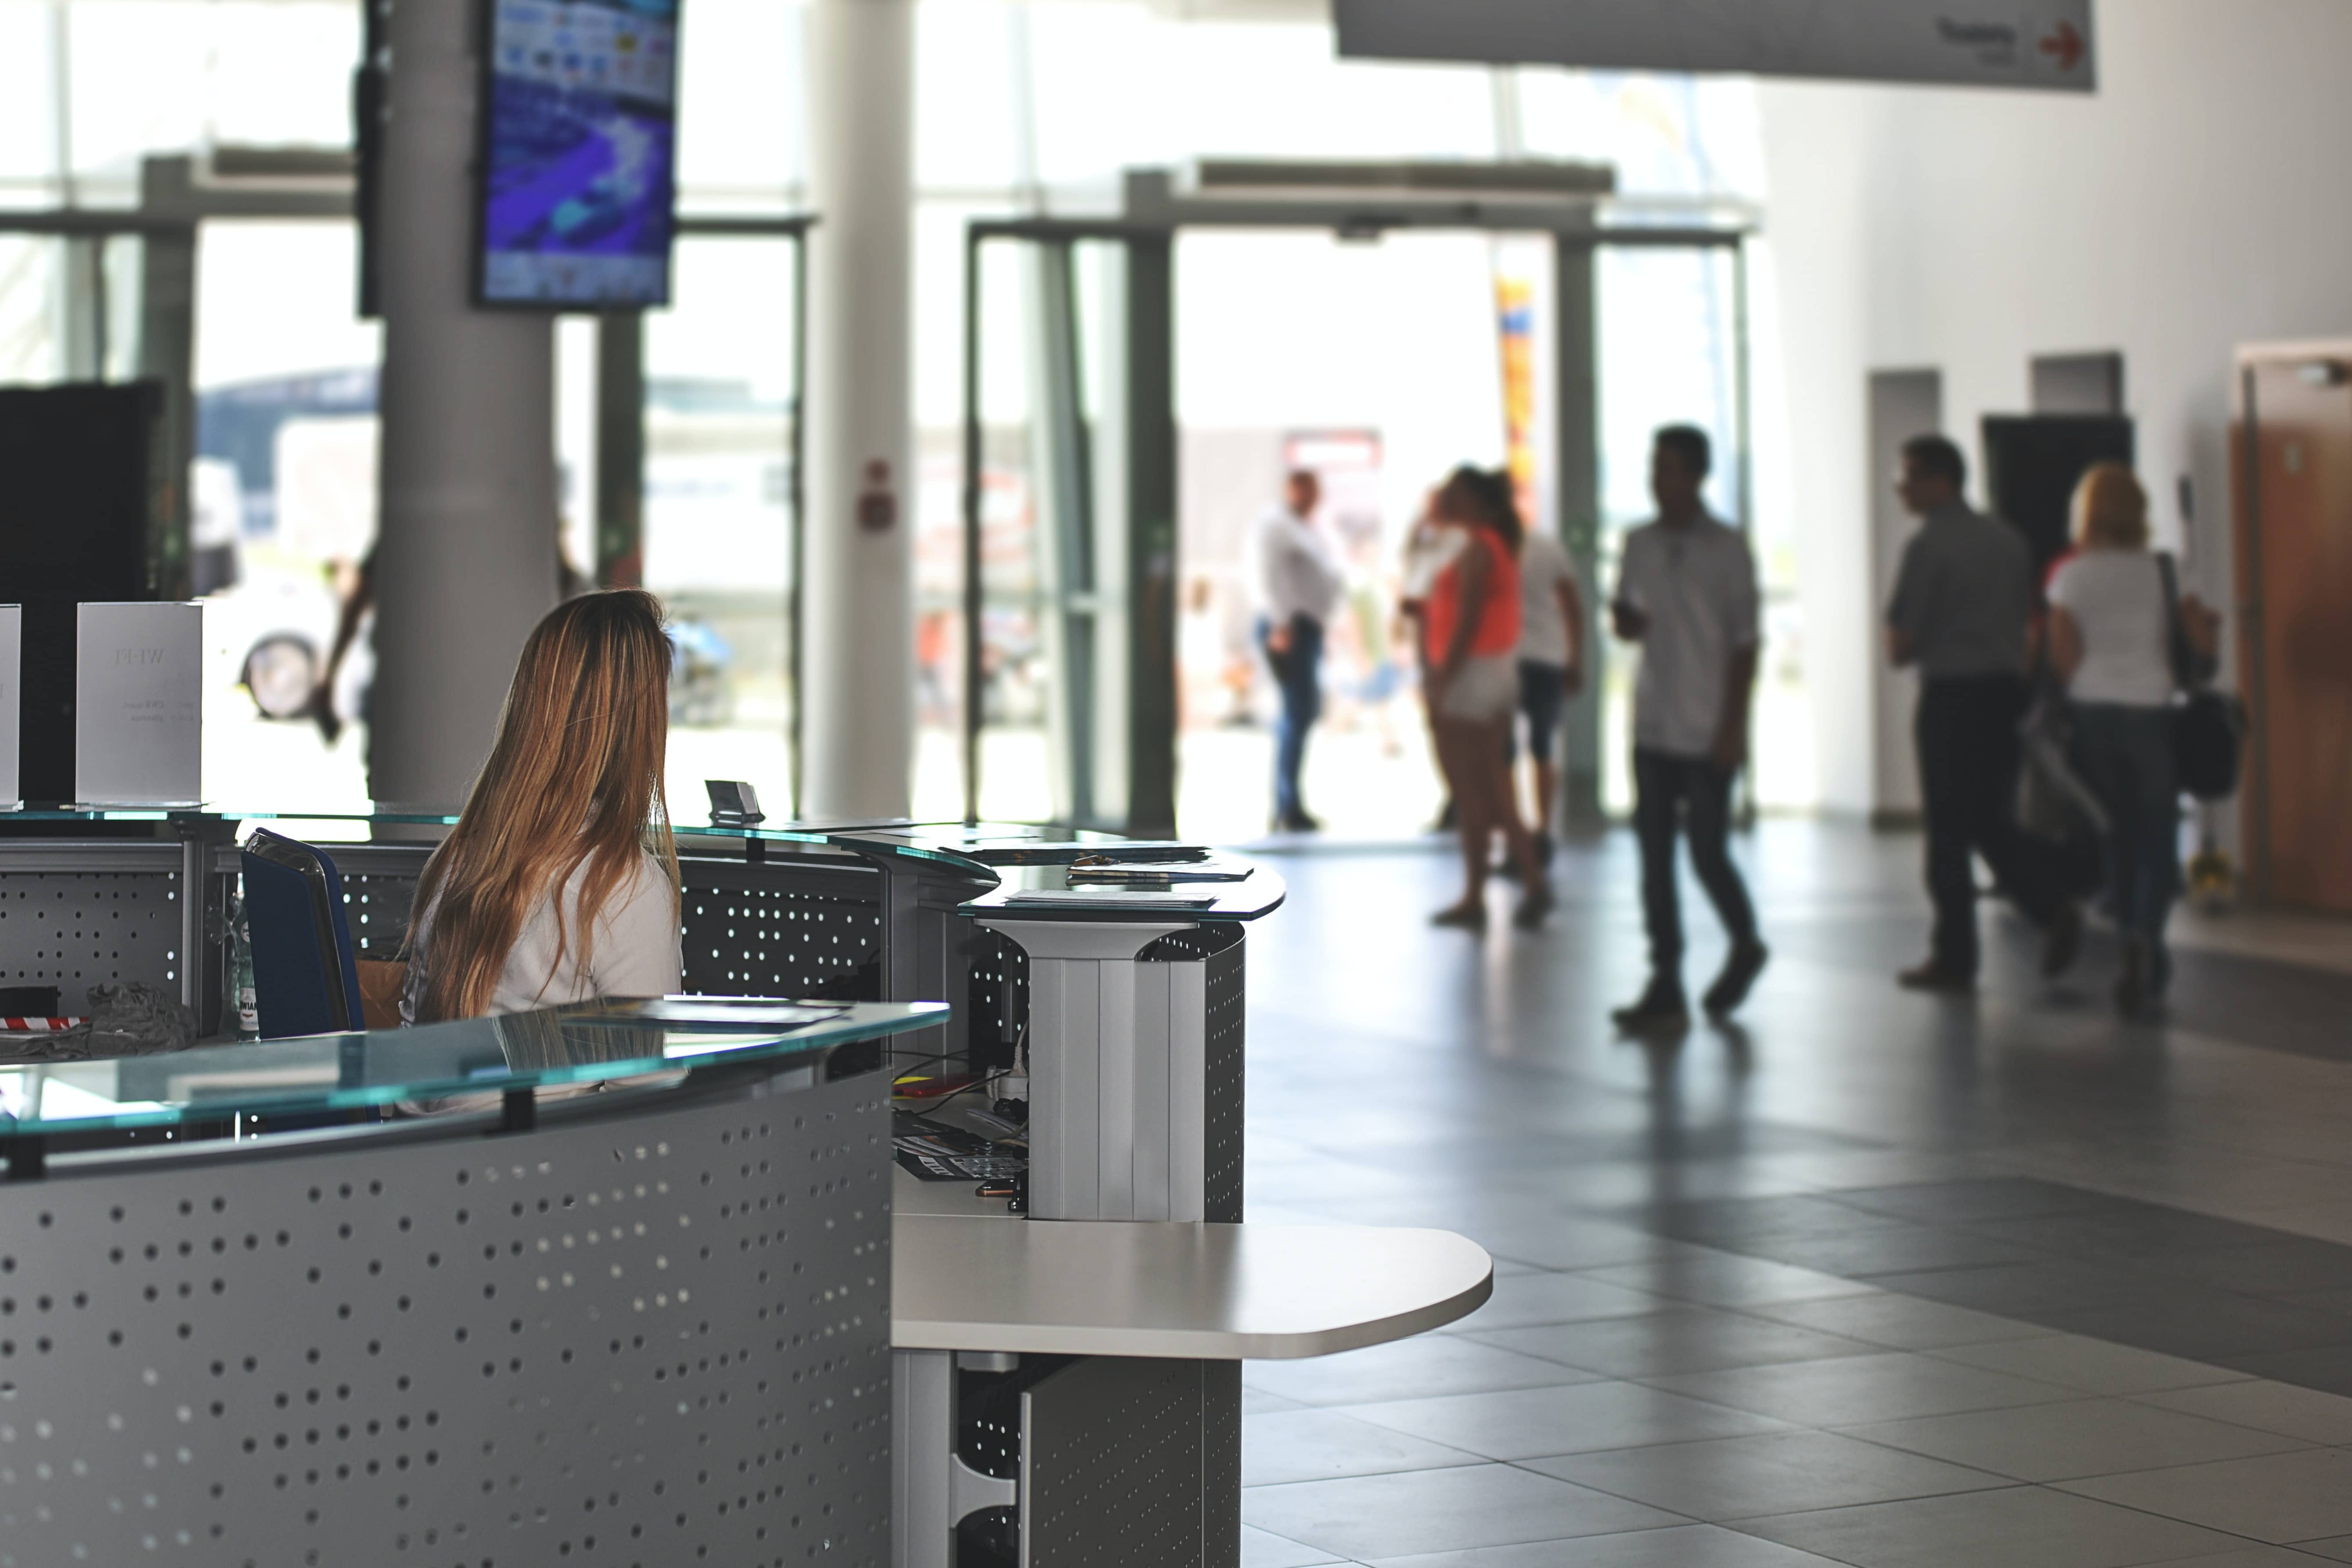 Reception desk at the airport